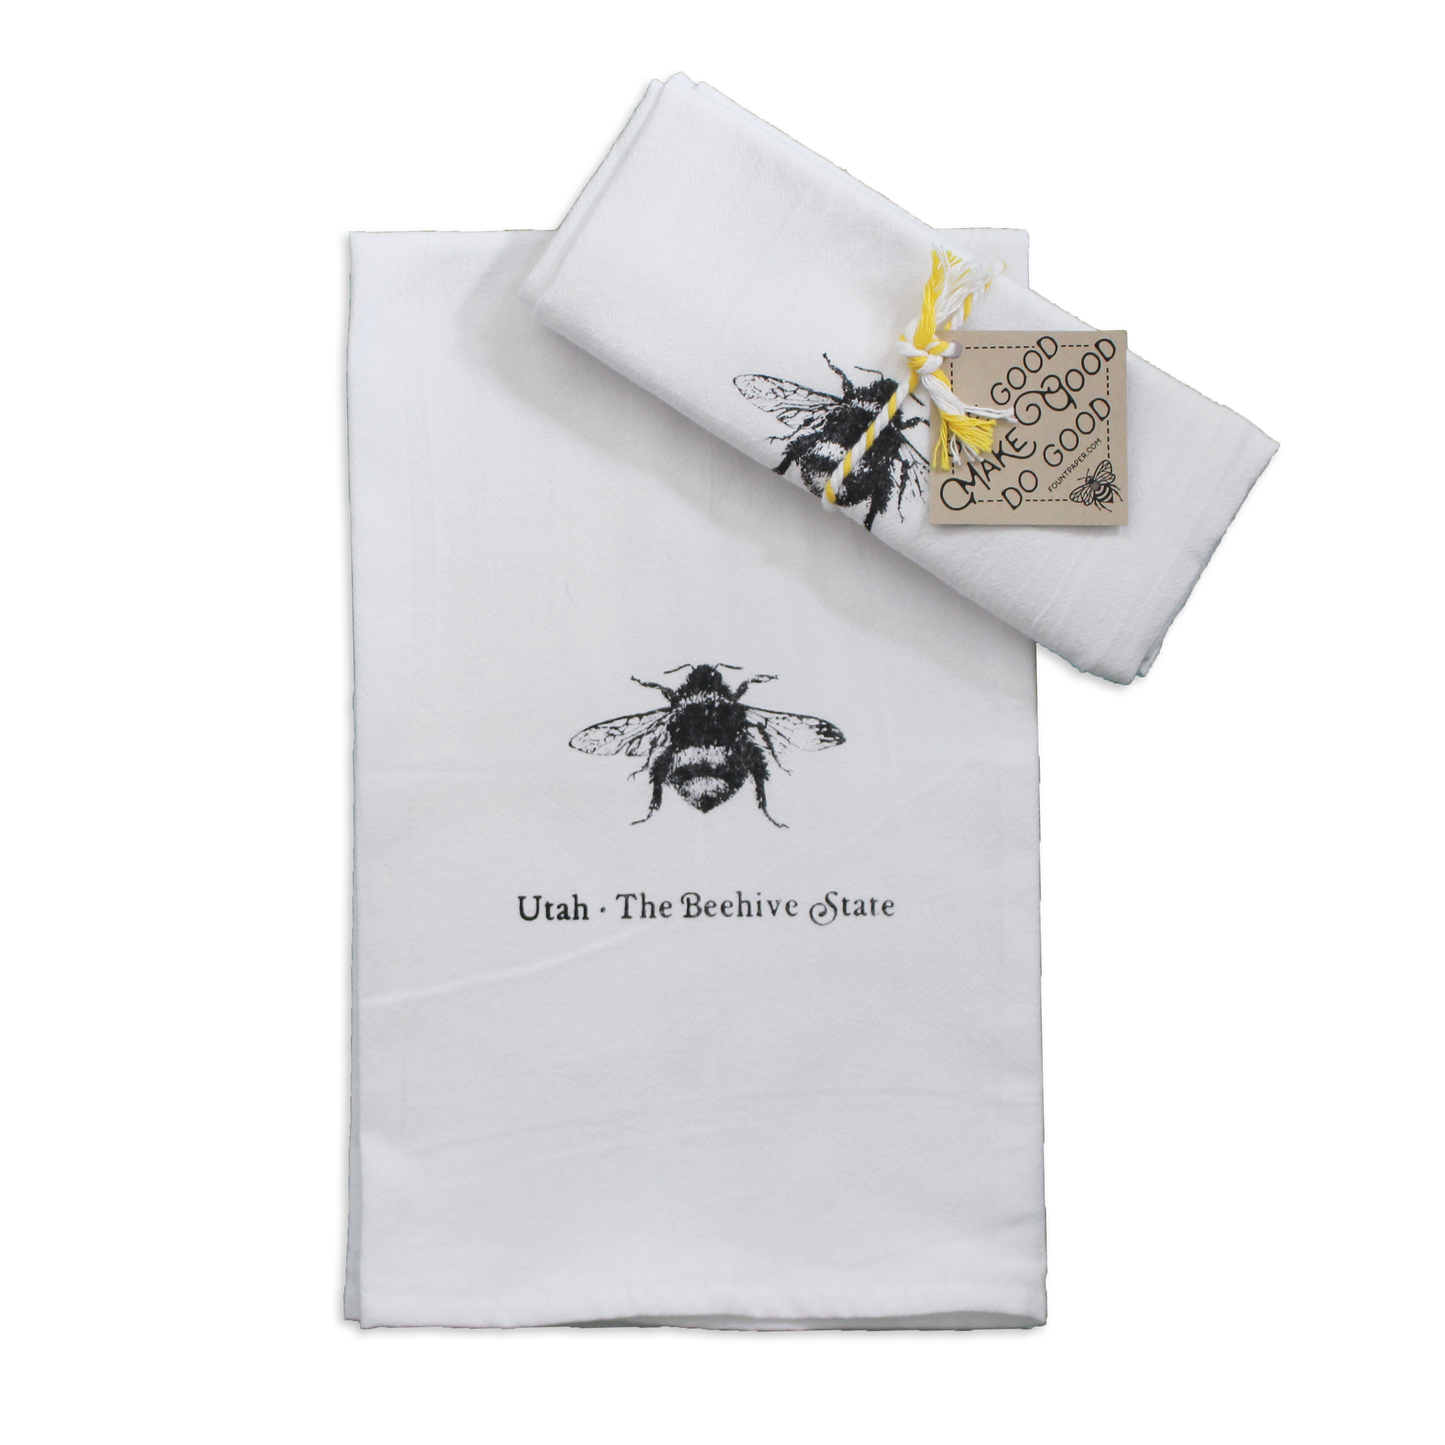 Utah the BEehive State tea towel featuring a realistic bee folded up and tied with a ribbon for a gift